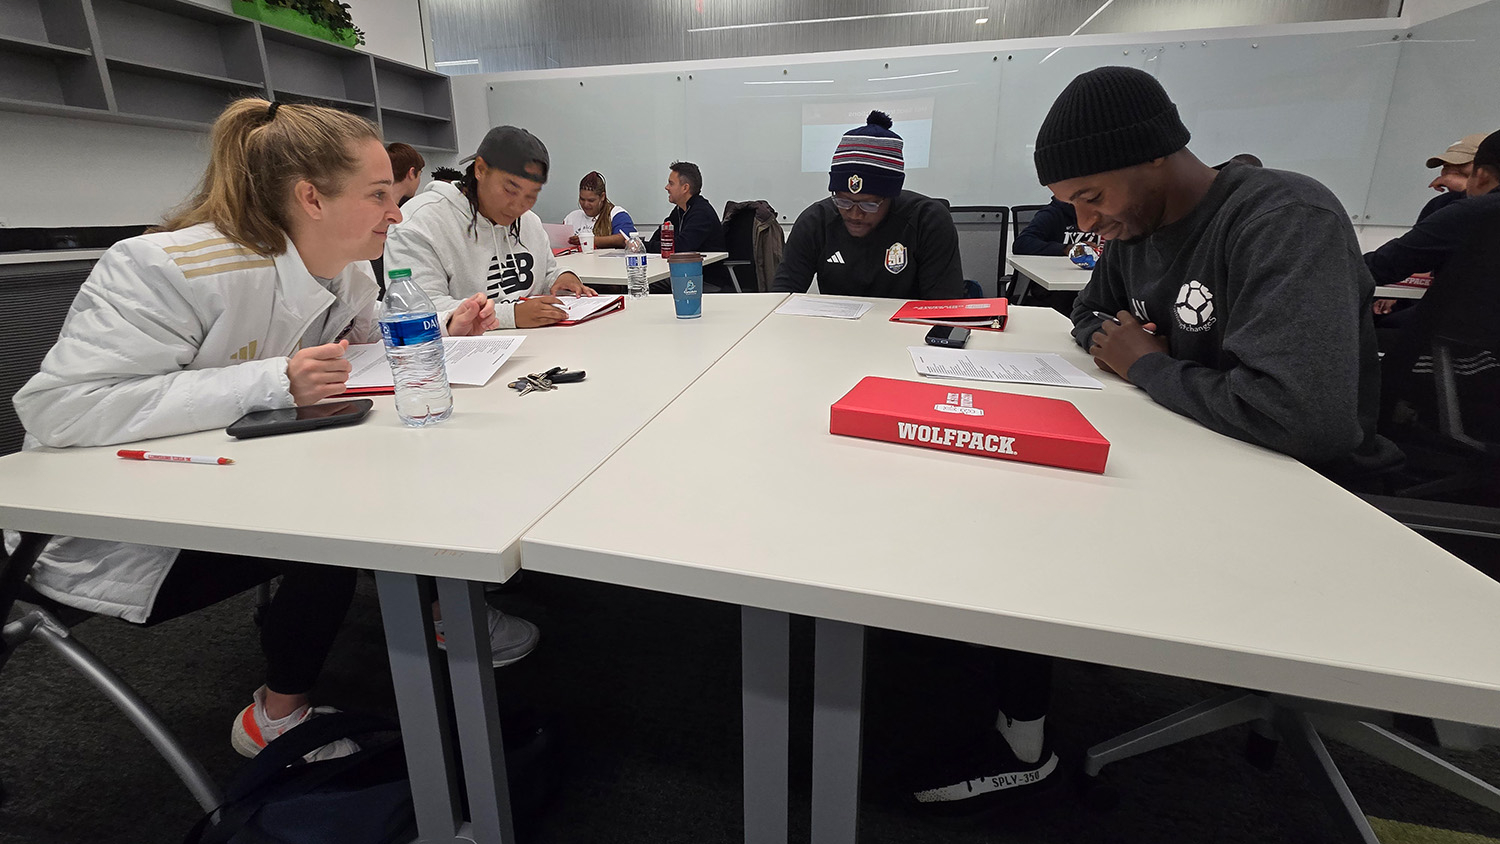 A group of people sitting at a table - Exchange Program Promotes Positive Youth Development Through Sports - Parks, Recreation and Tourism Management at NC State University